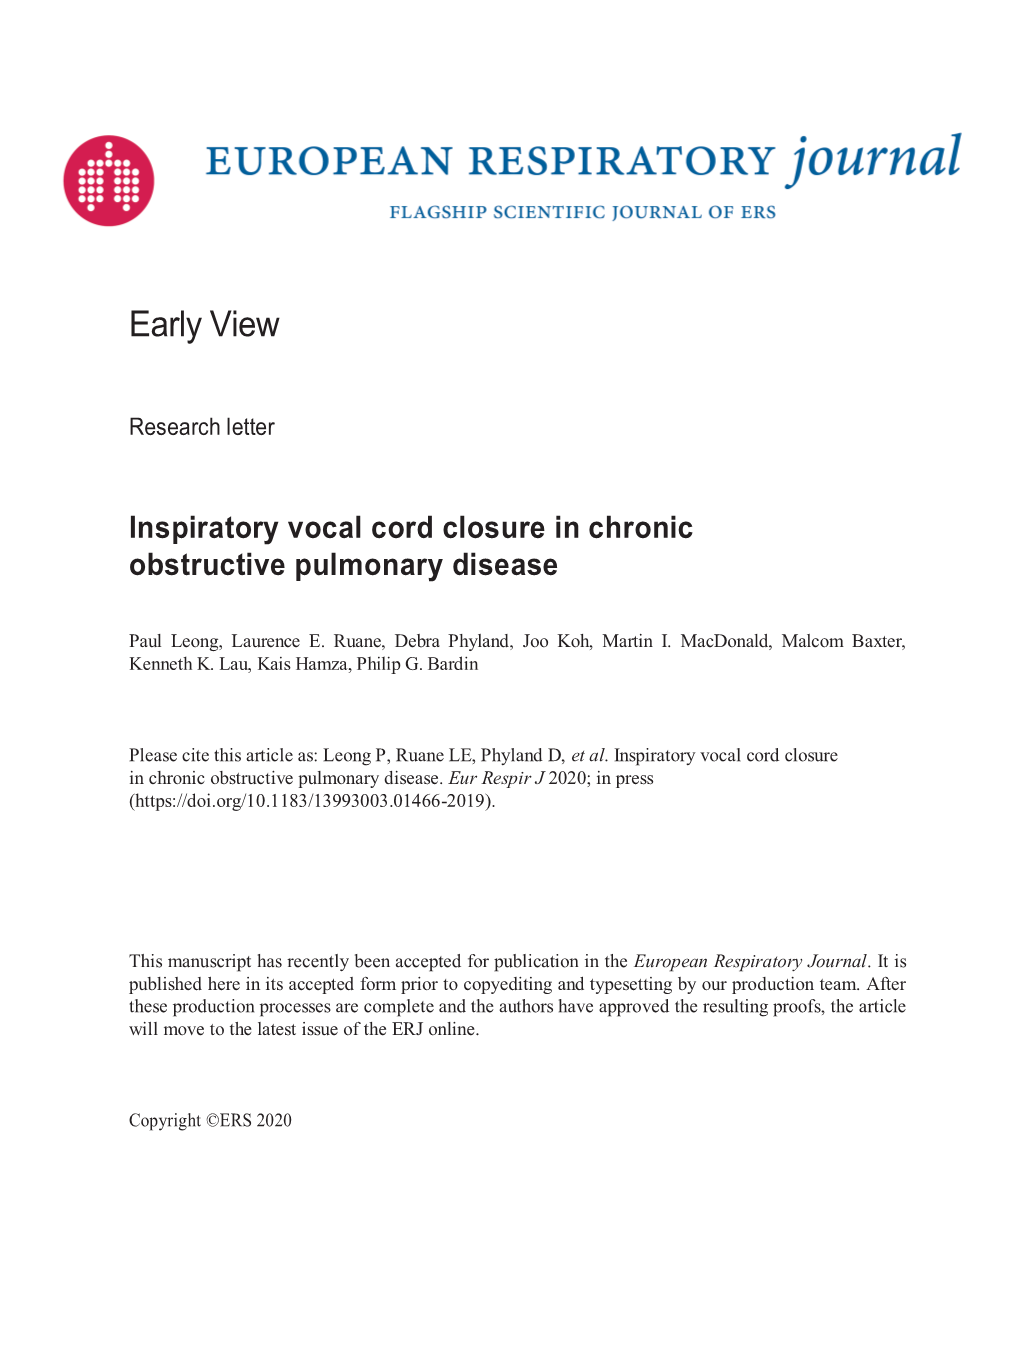 Inspiratory Vocal Cord Closure in Chronic Obstructive Pulmonary Disease